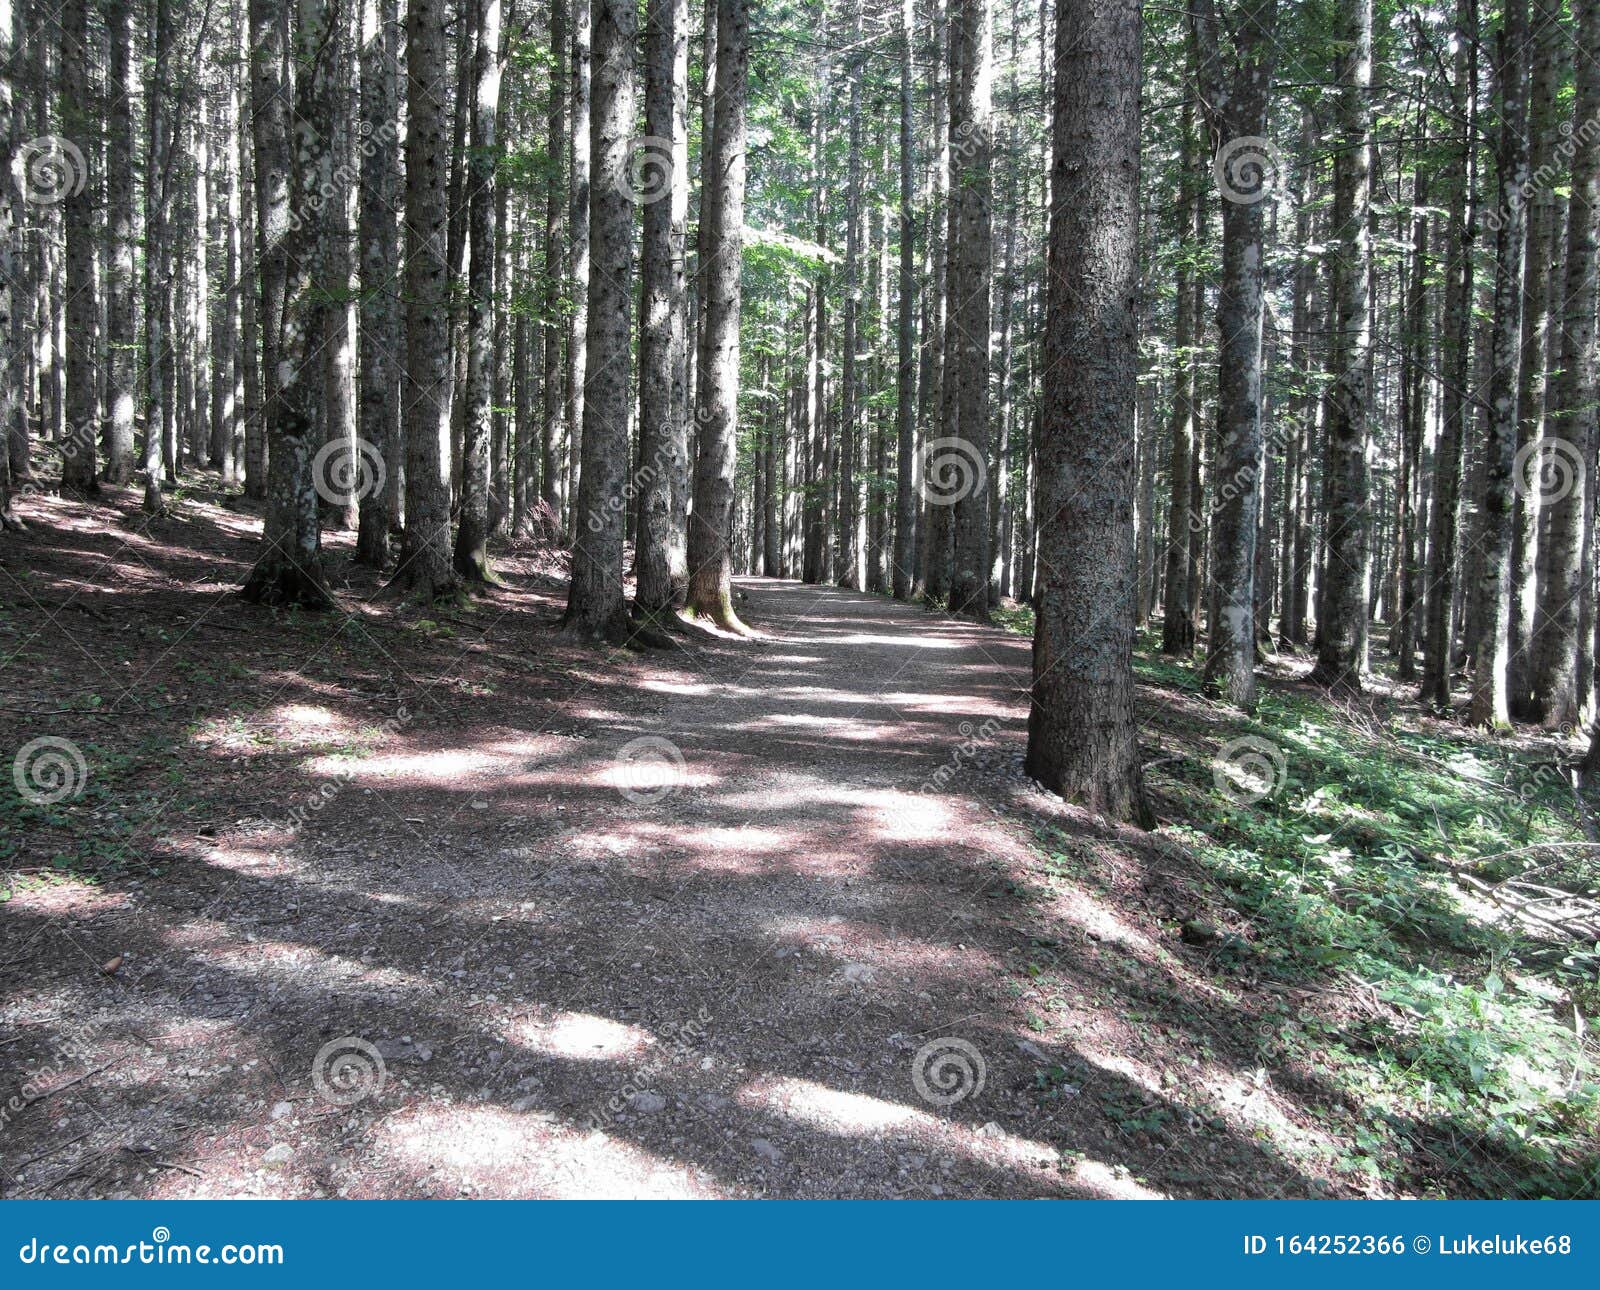 hiking path through forest of beech trees in summer. abetone, tuscany, italy